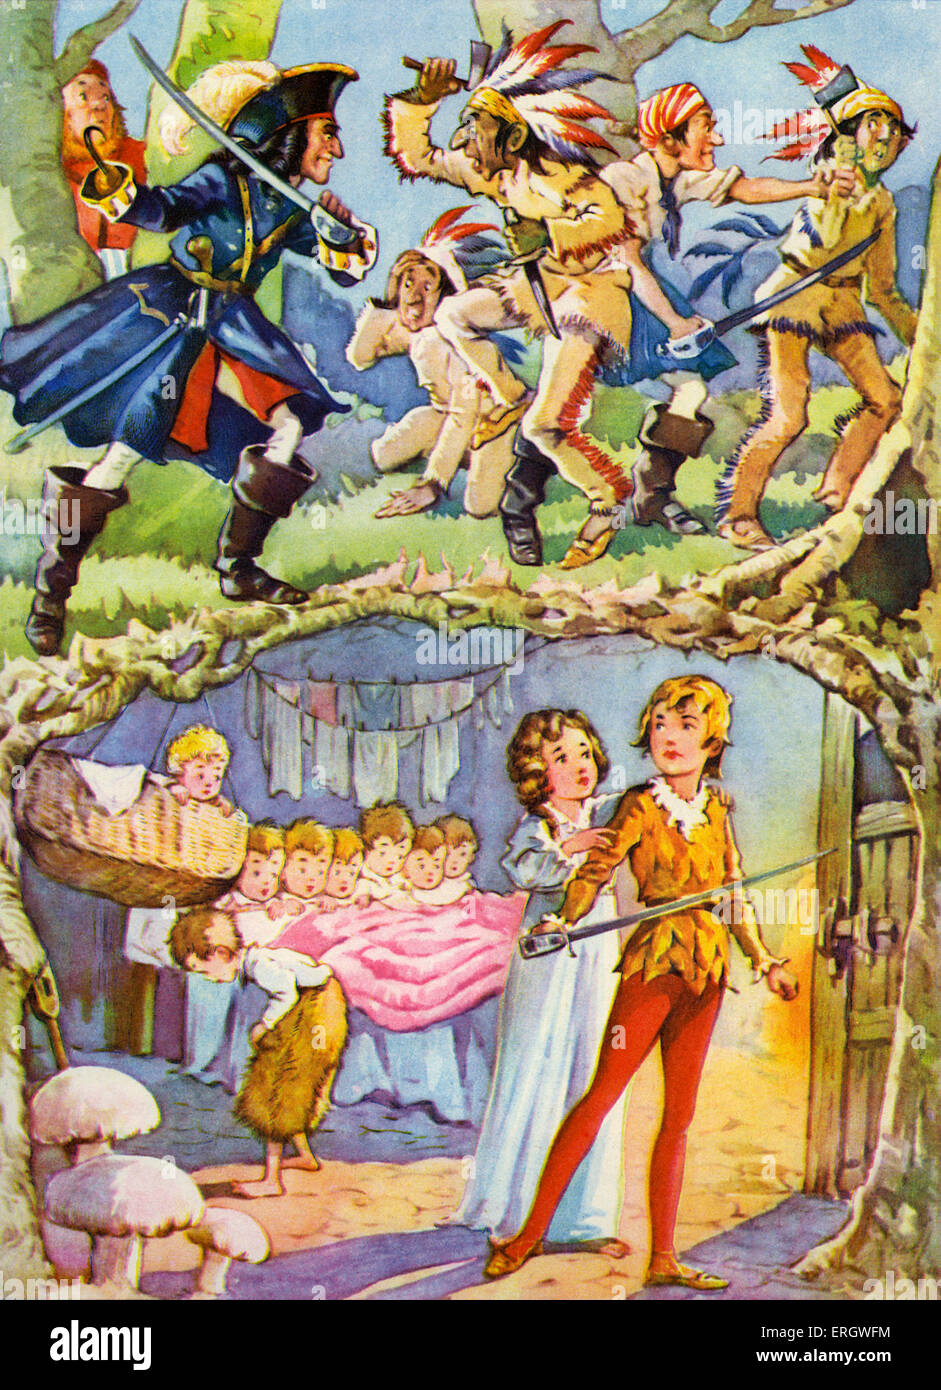 'Peter Pan and Wendy' by James Matthew Barrie. Redskins attacked by Captain Hook and the pirates.  Peter Pan and the children Stock Photo